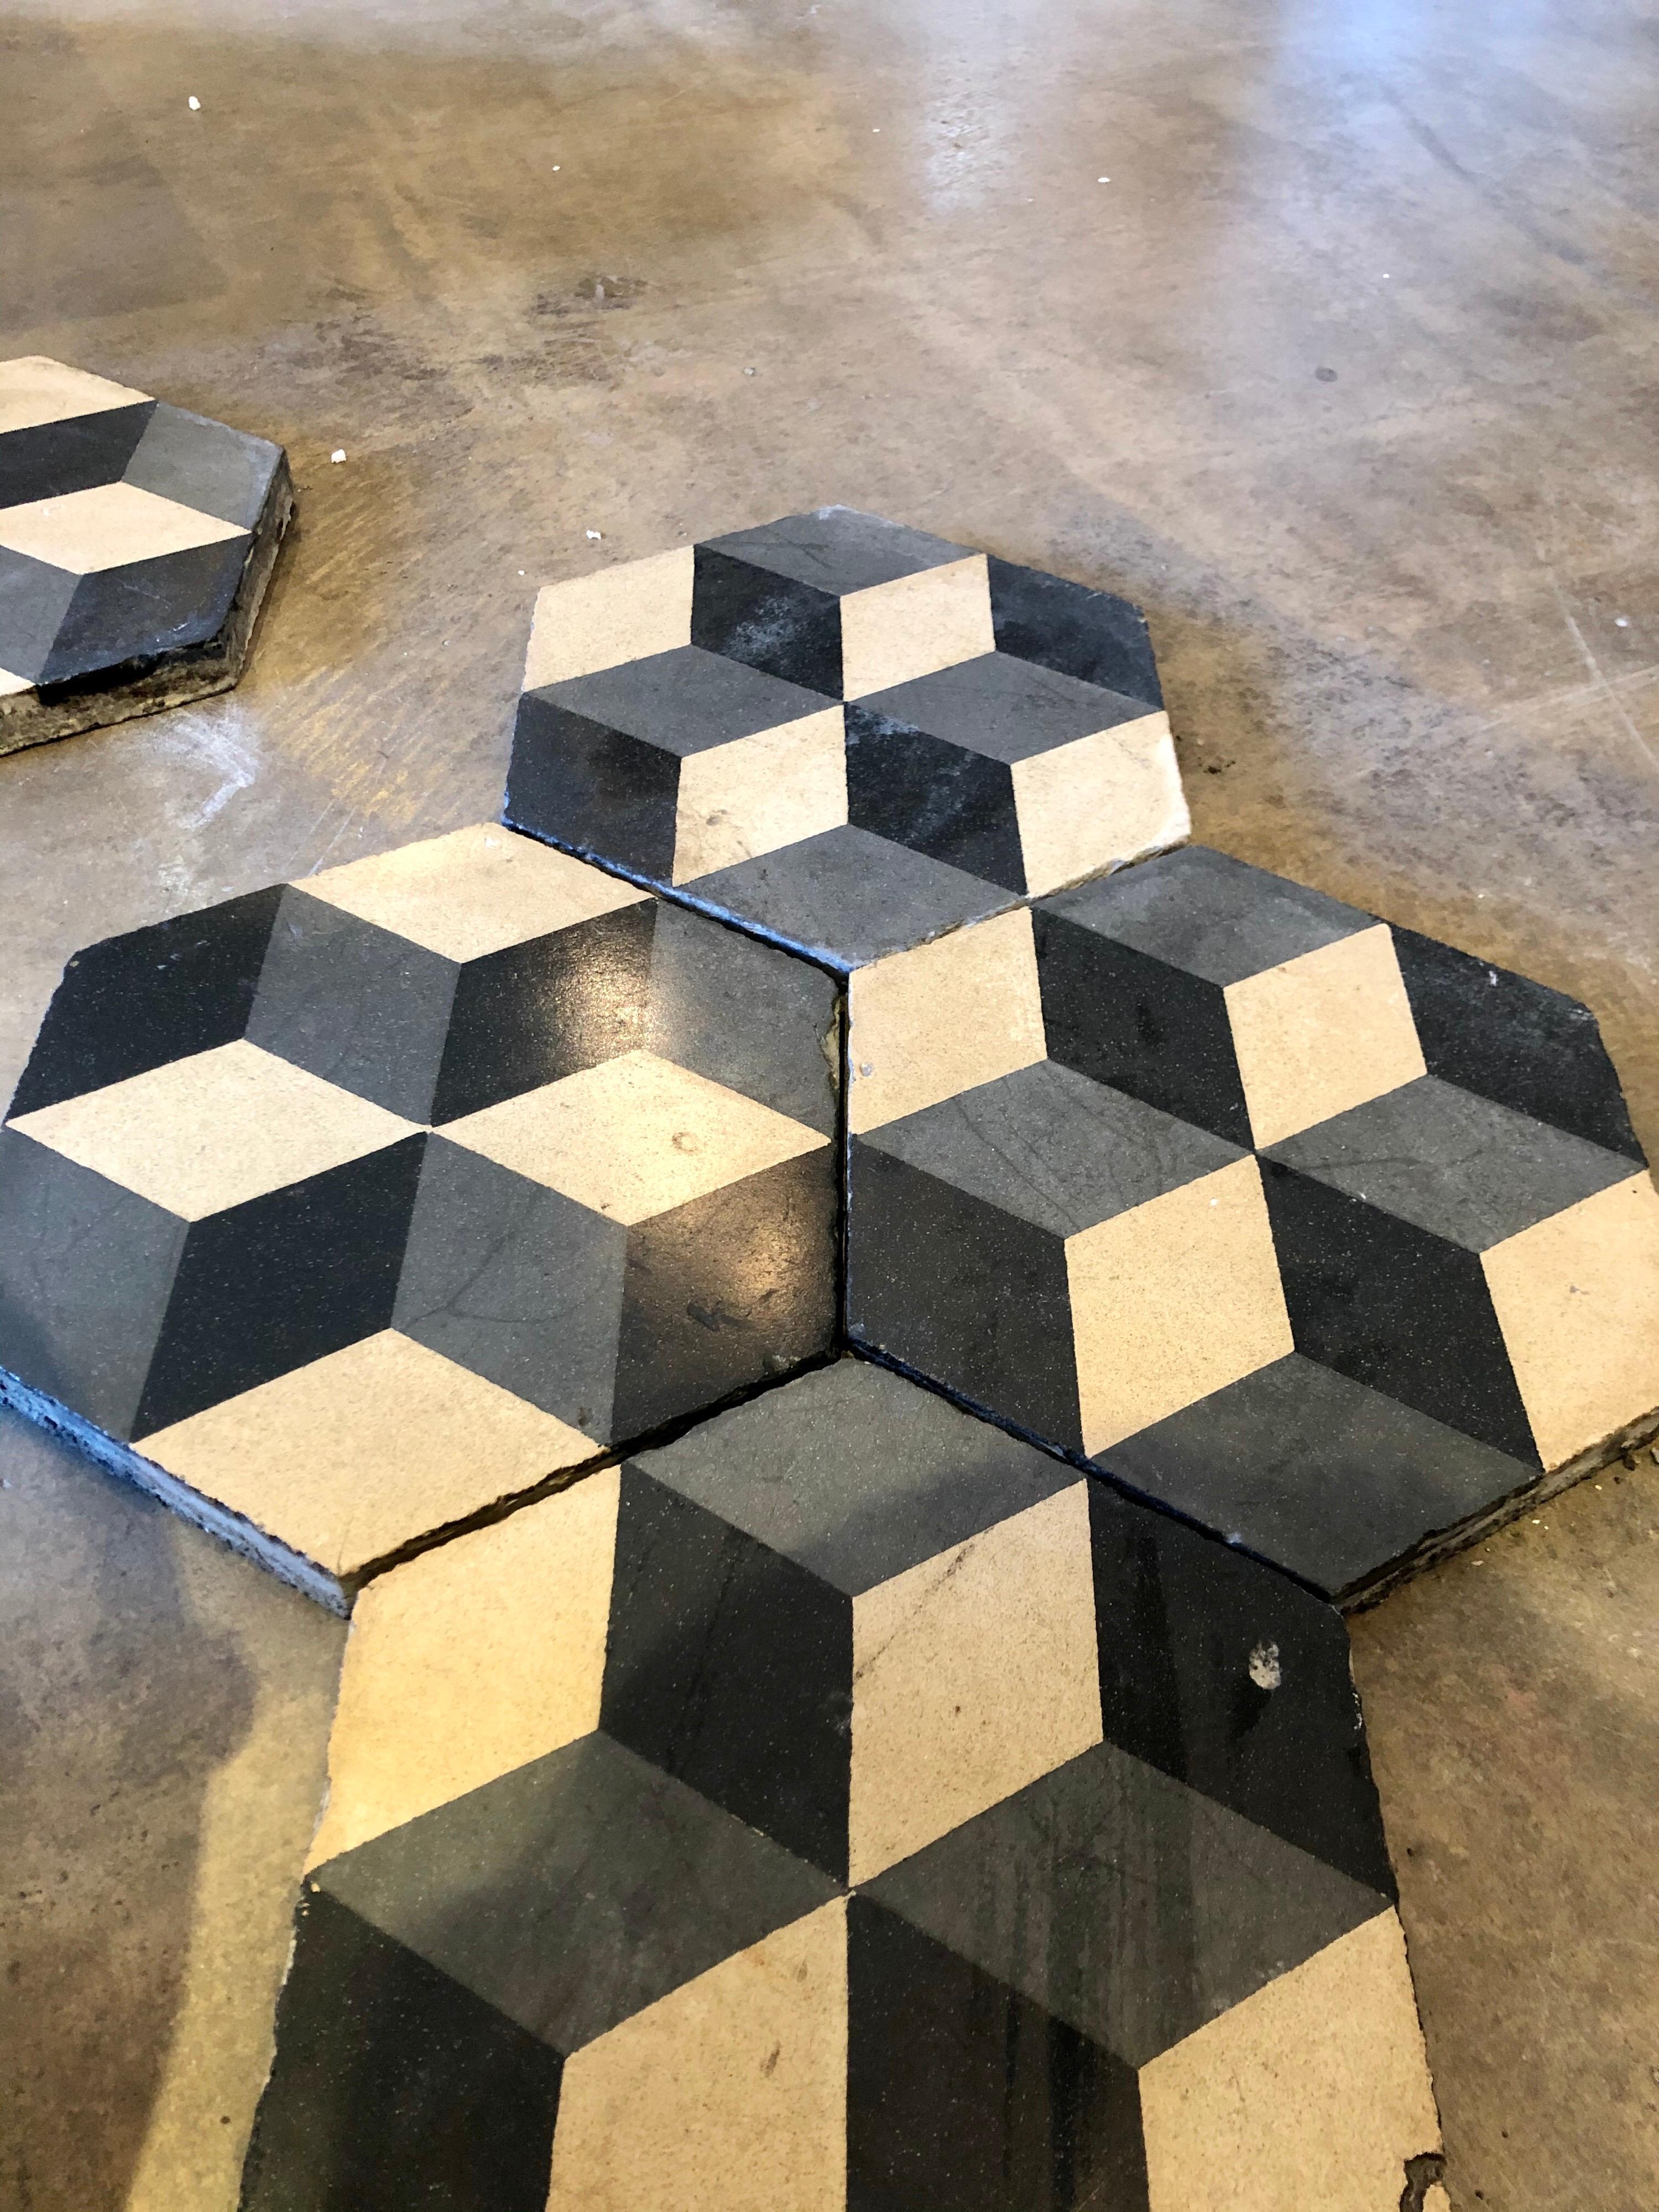 Black and white encaustic tiles.

We have 160 sq ft of those tiles.

We only sell the entire lot. 